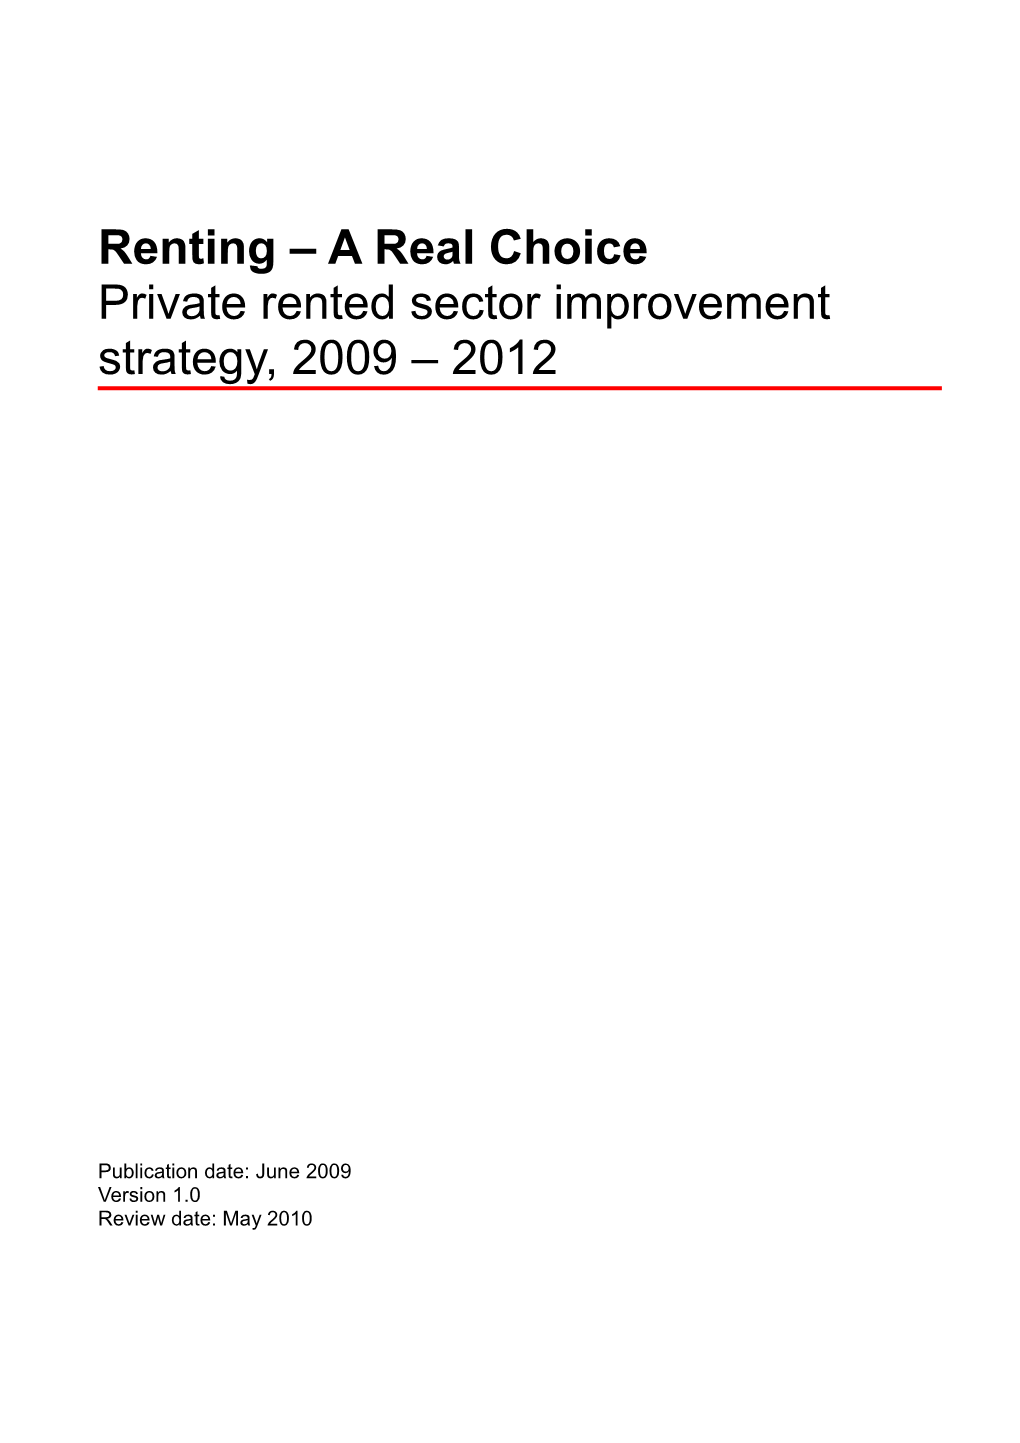 Renting - a Real Choice